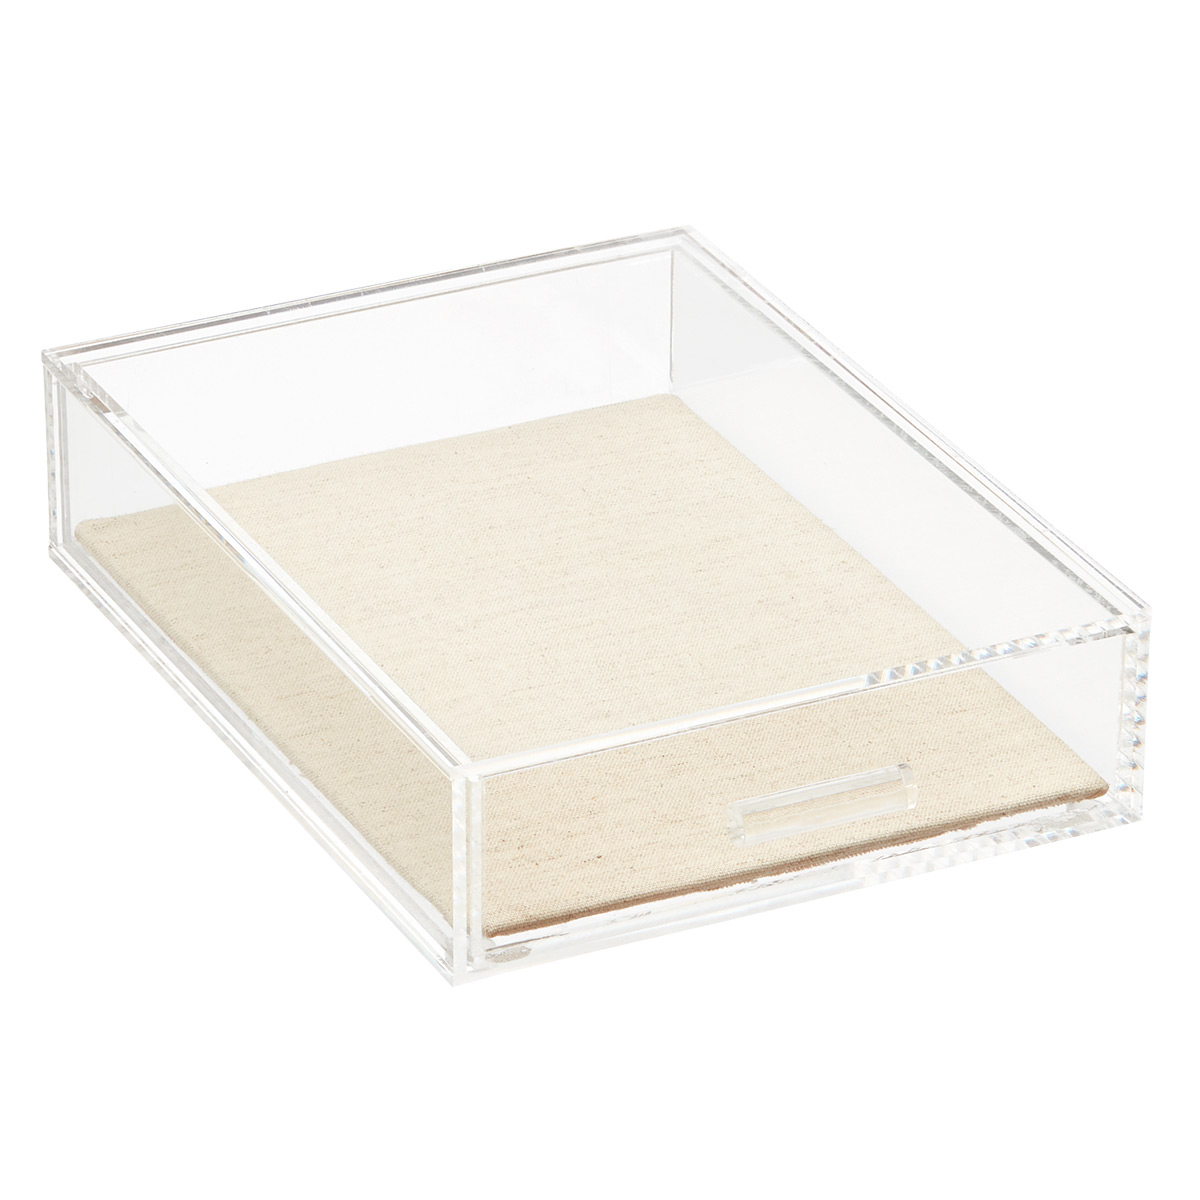 The Container Store 1-Compartment Narrow Luxe Acrylic Jewelry Drawer Clear/Linen